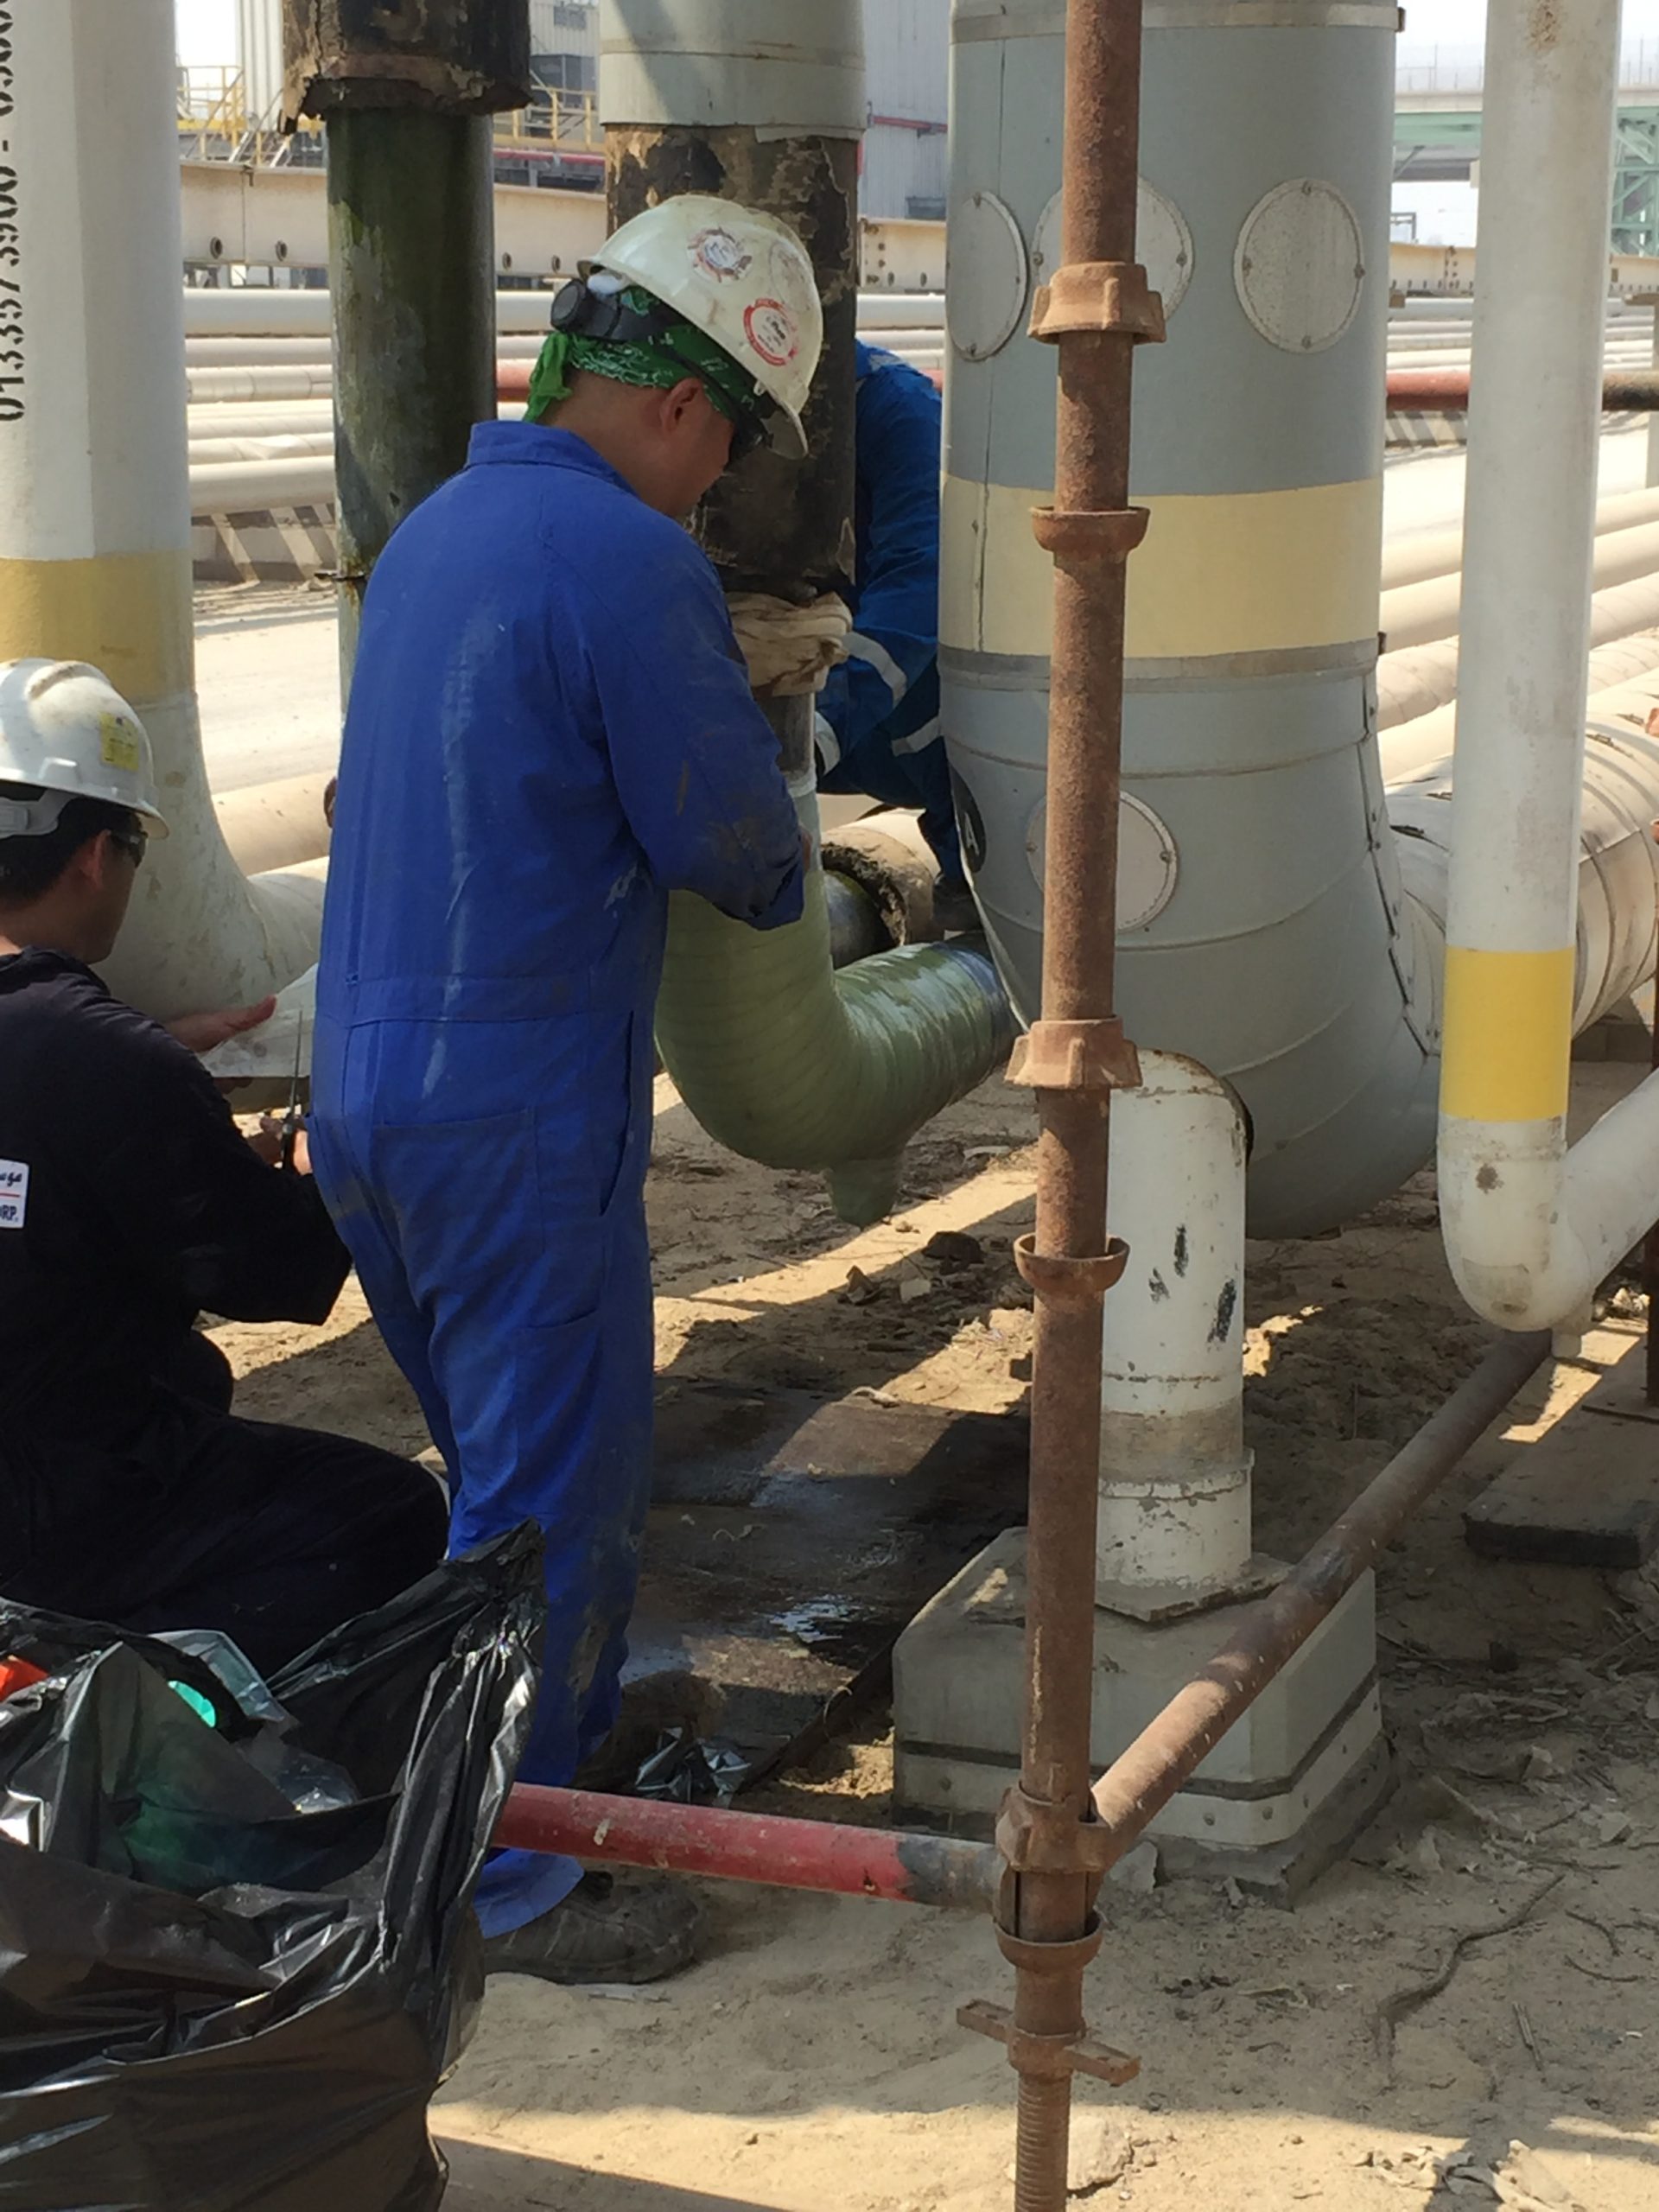 A team of 8 technicians carried out the Contour installation, applying in 45.6 meters (149.6 feet) of Contour reinforcement over the course of 3 weeks.